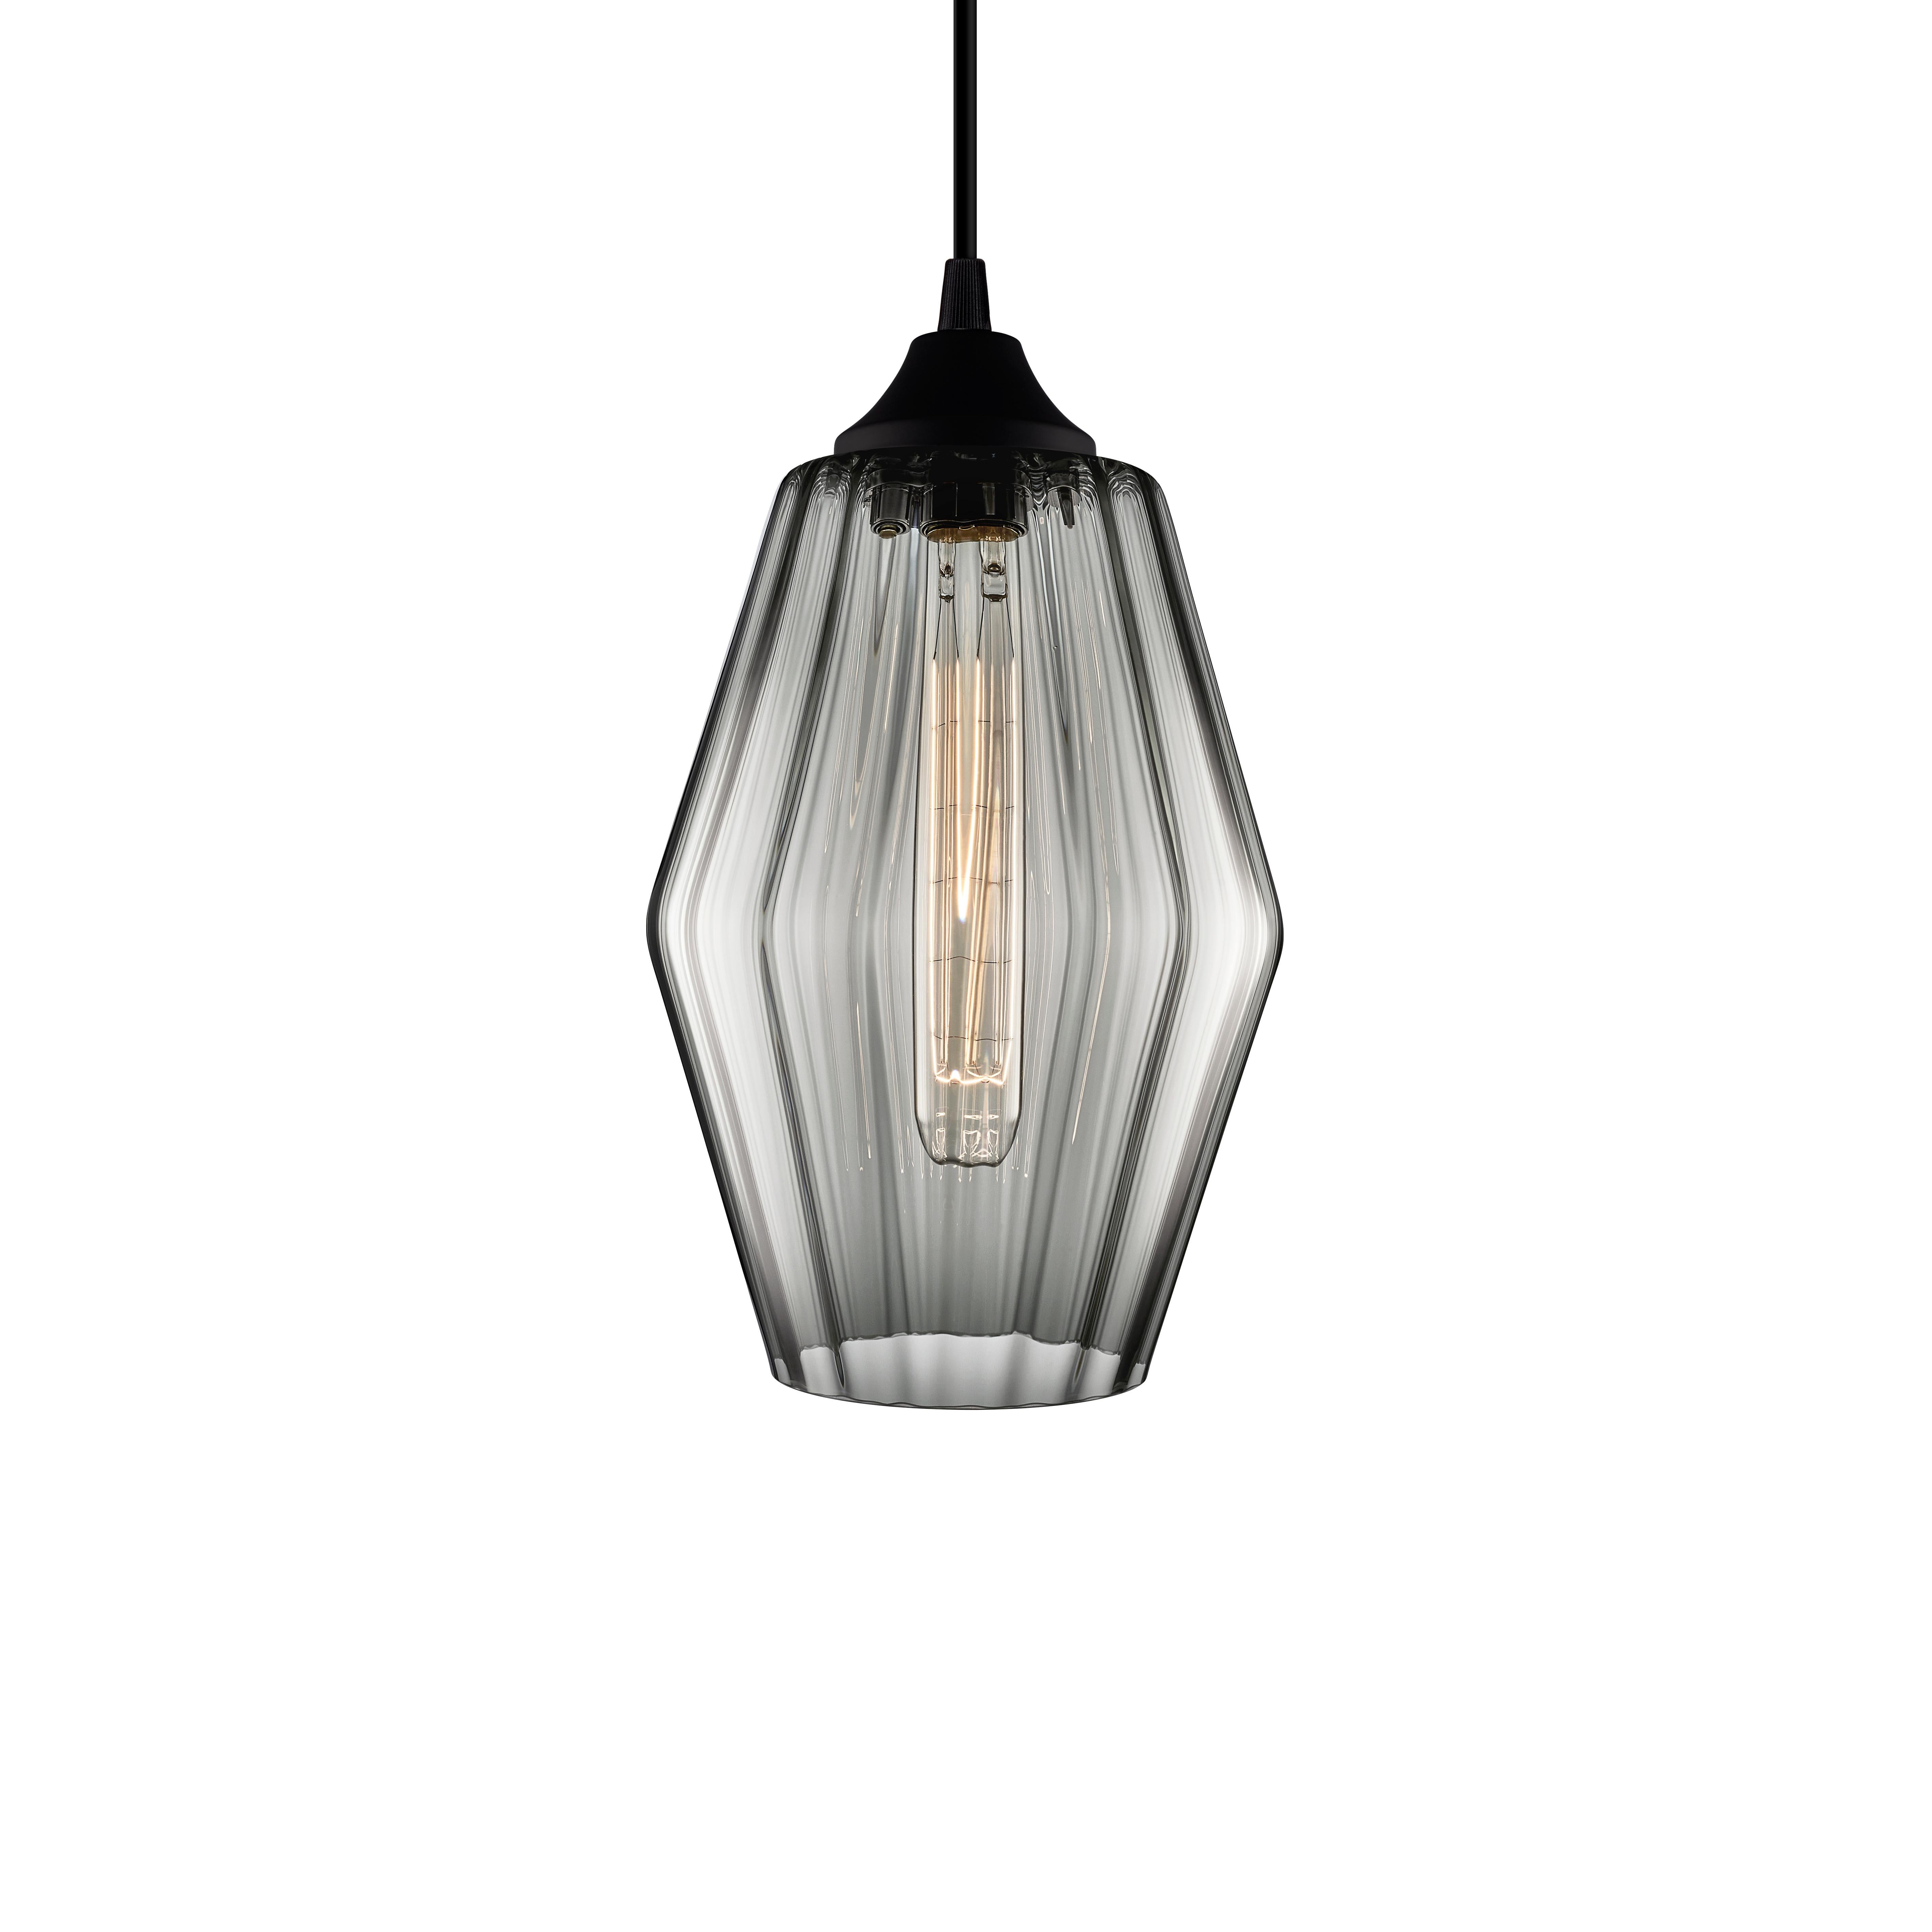 American Marquise Petite Gray Handblown Modern Glass Pendant Light, Made in the USA For Sale